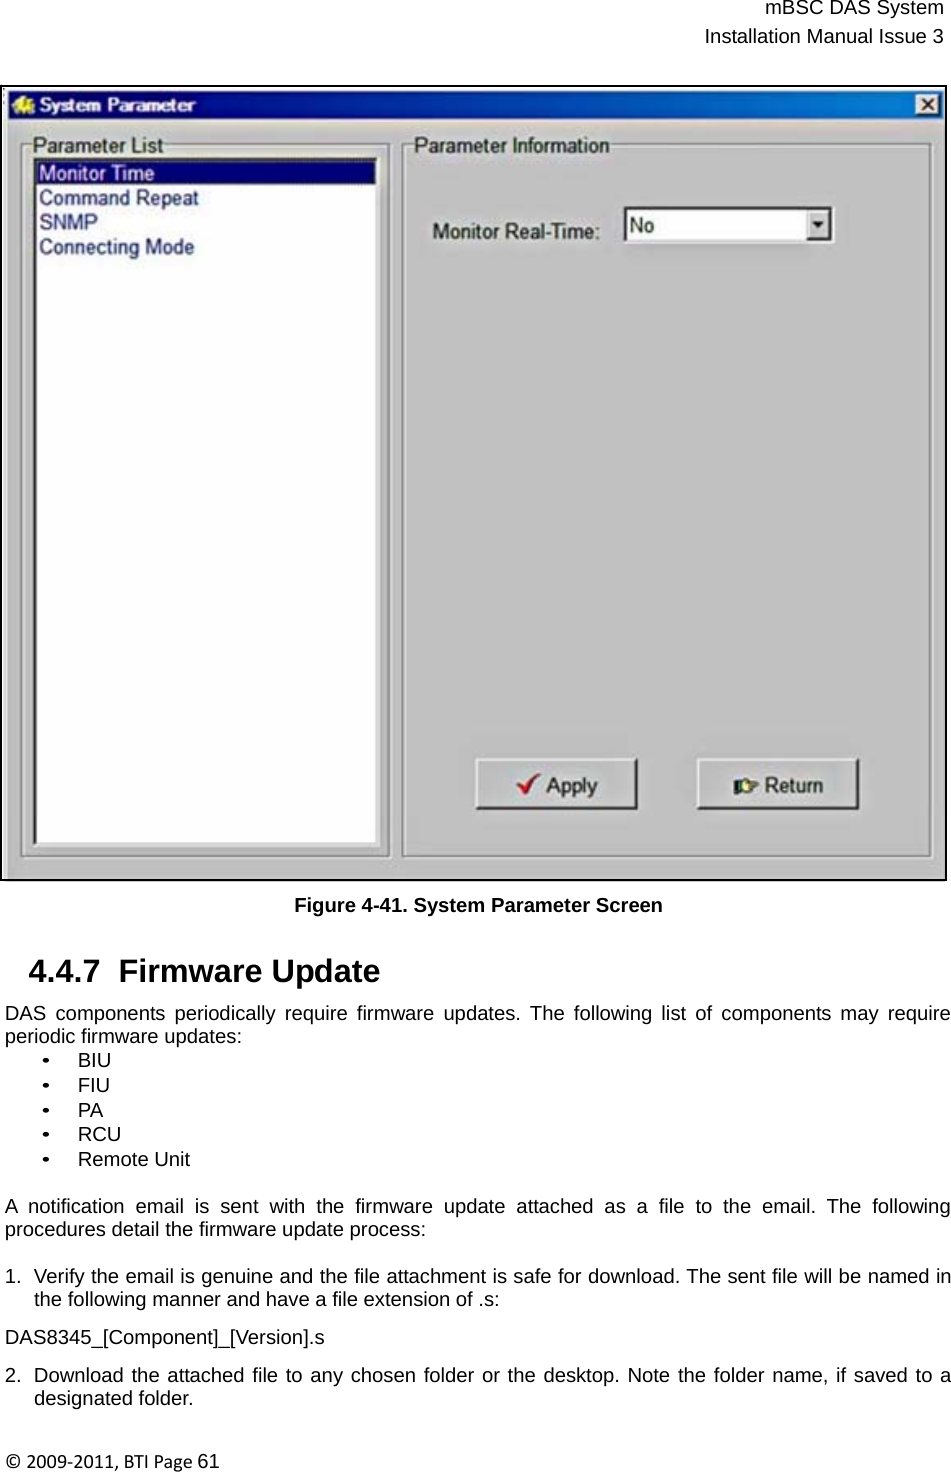 mBSC DAS SystemInstallation Manual Issue 3©2009‐2011,BTIPage61                                          Figure 4-41. System Parameter Screen   4.4.7  Firmware Update  DAS components periodically require firmware updates. The following list of components may require periodic firmware updates: • BIU • FIU • PA • RCU • Remote Unit  A notification email is sent with the firmware update attached as a file to the email. The following procedures detail the firmware update process:  1.  Verify the email is genuine and the file attachment is safe for download. The sent file will be named in the following manner and have a file extension of .s:  DAS8345_[Component]_[Version].s  2.  Download the attached file to any chosen folder or the desktop. Note the folder name, if saved to a designated folder. 